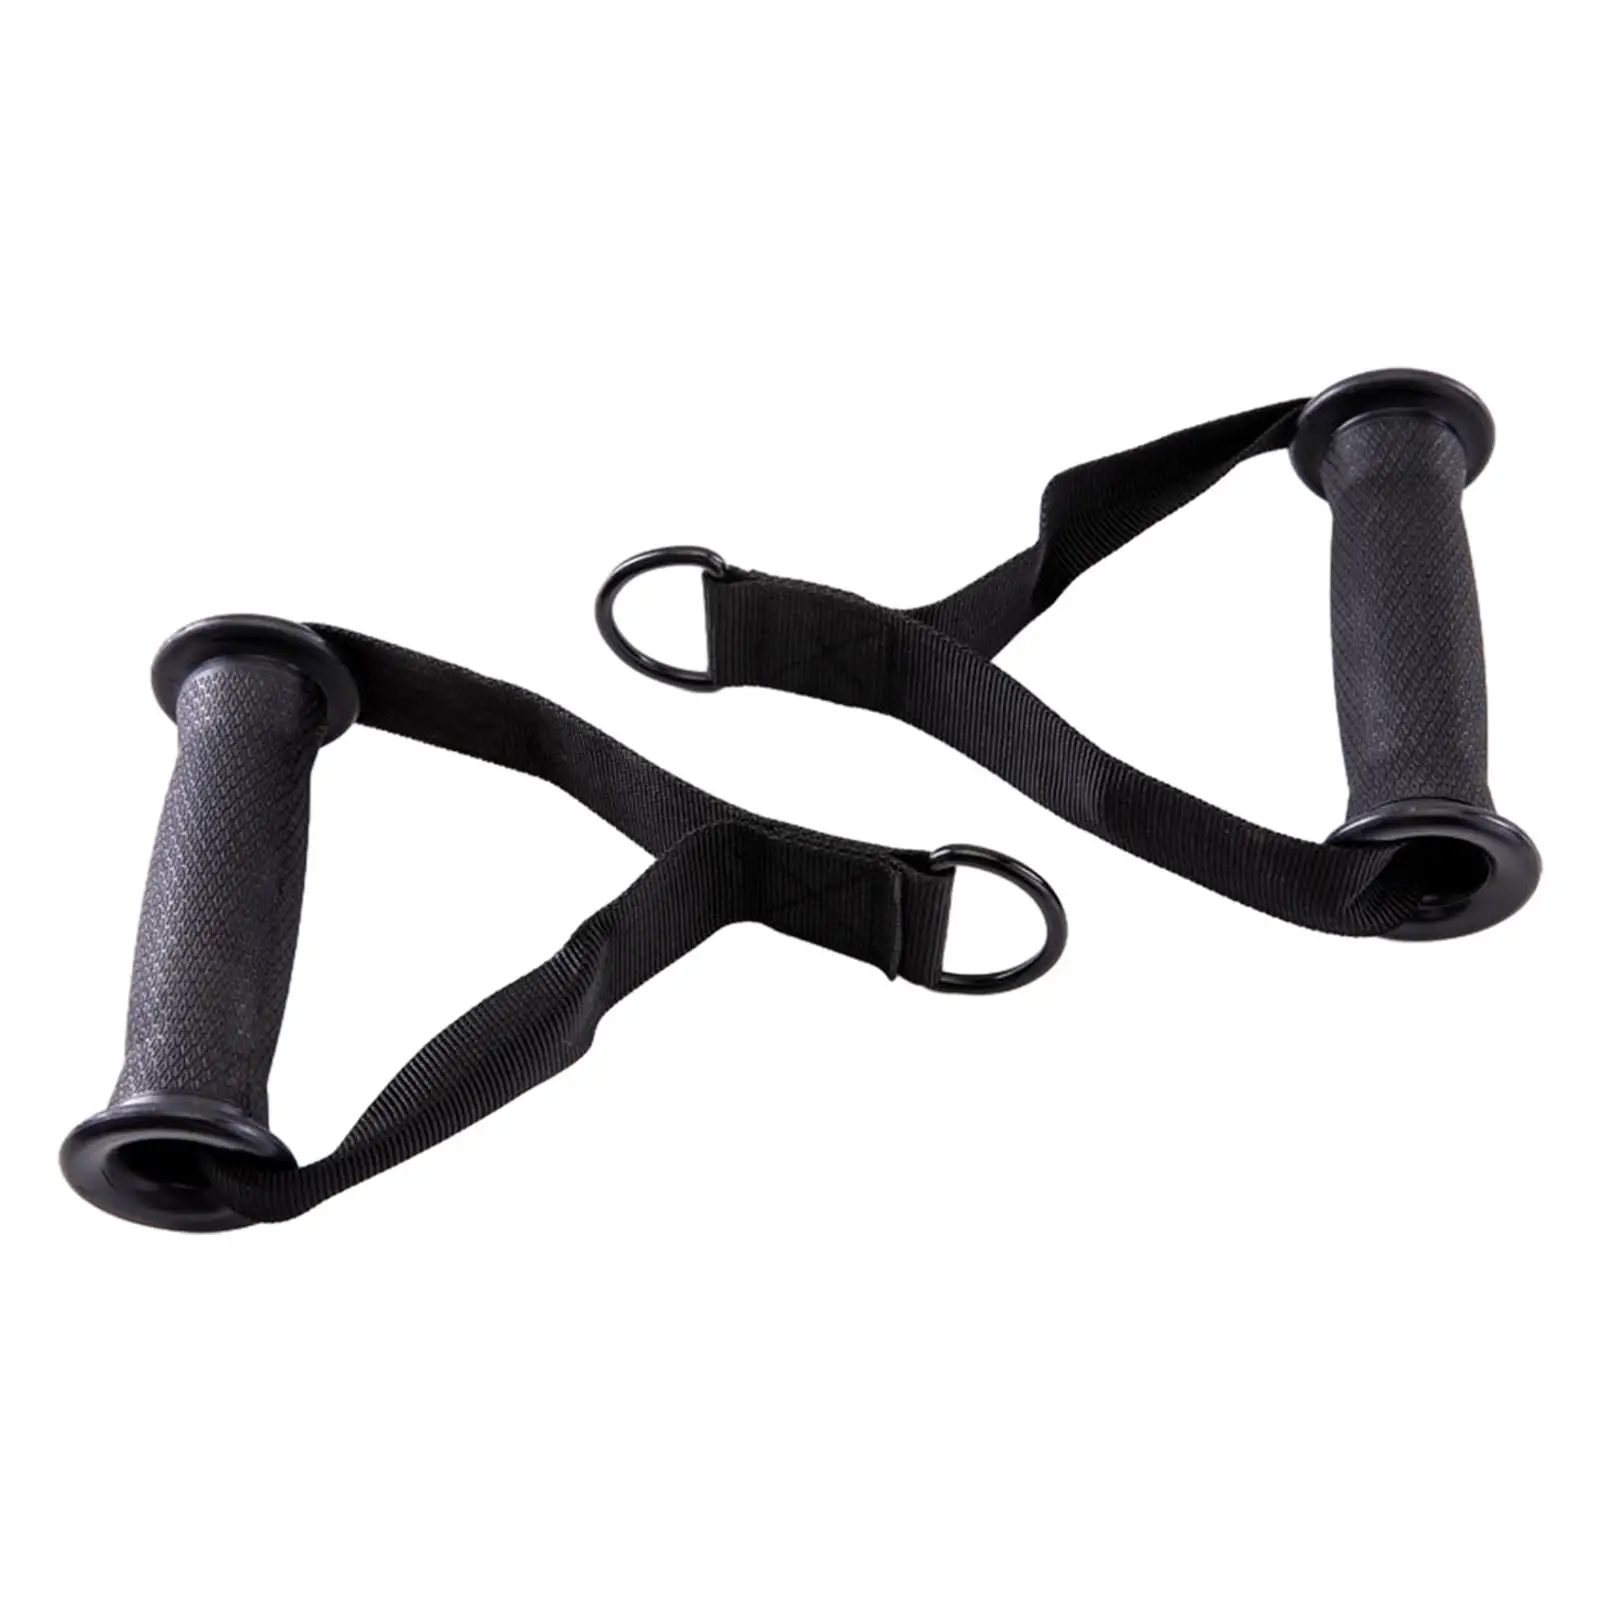 Cable Machine Handles, Resistance Band Handles Grips, Heavy Duty Exercise Handles for Fitness Equipment, Pulley System